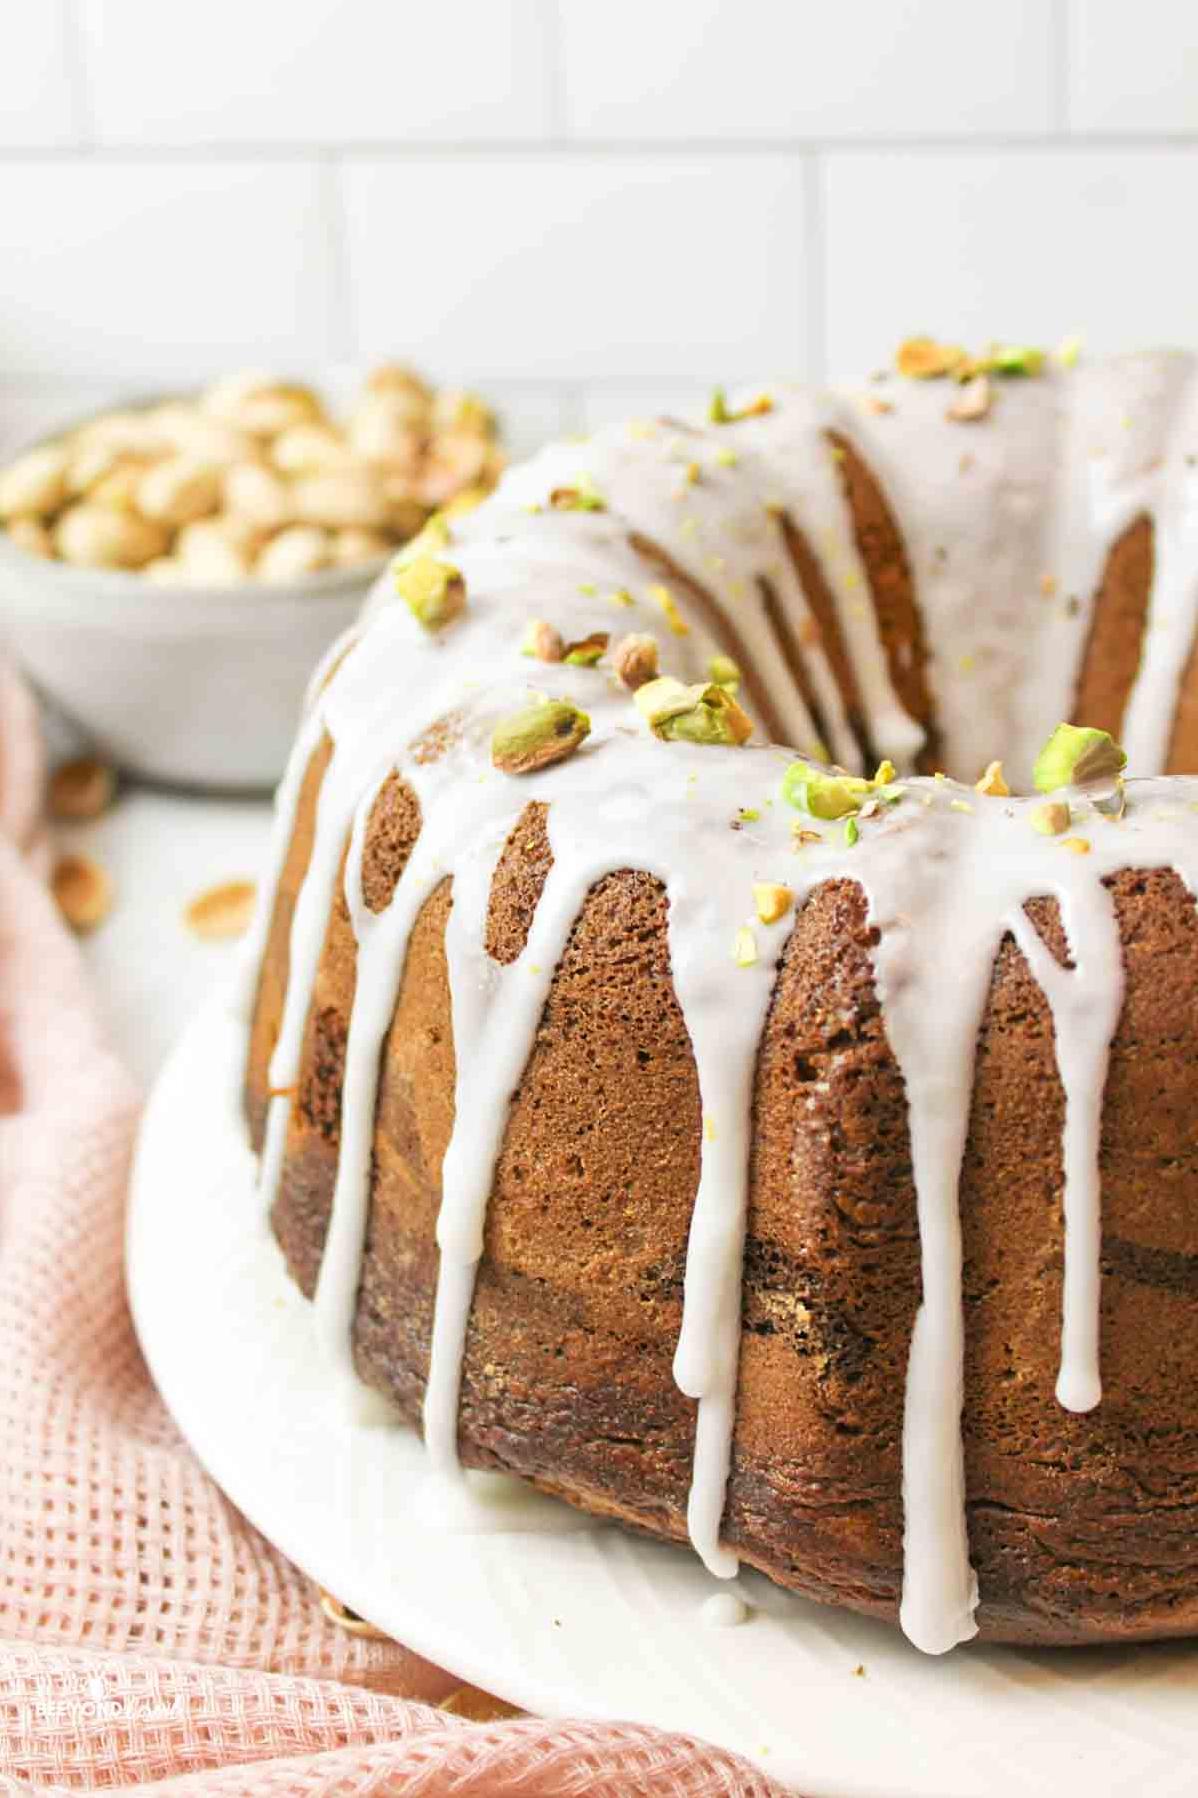  Top off this cake with a delicious and crunchy chocolate pistachio glaze